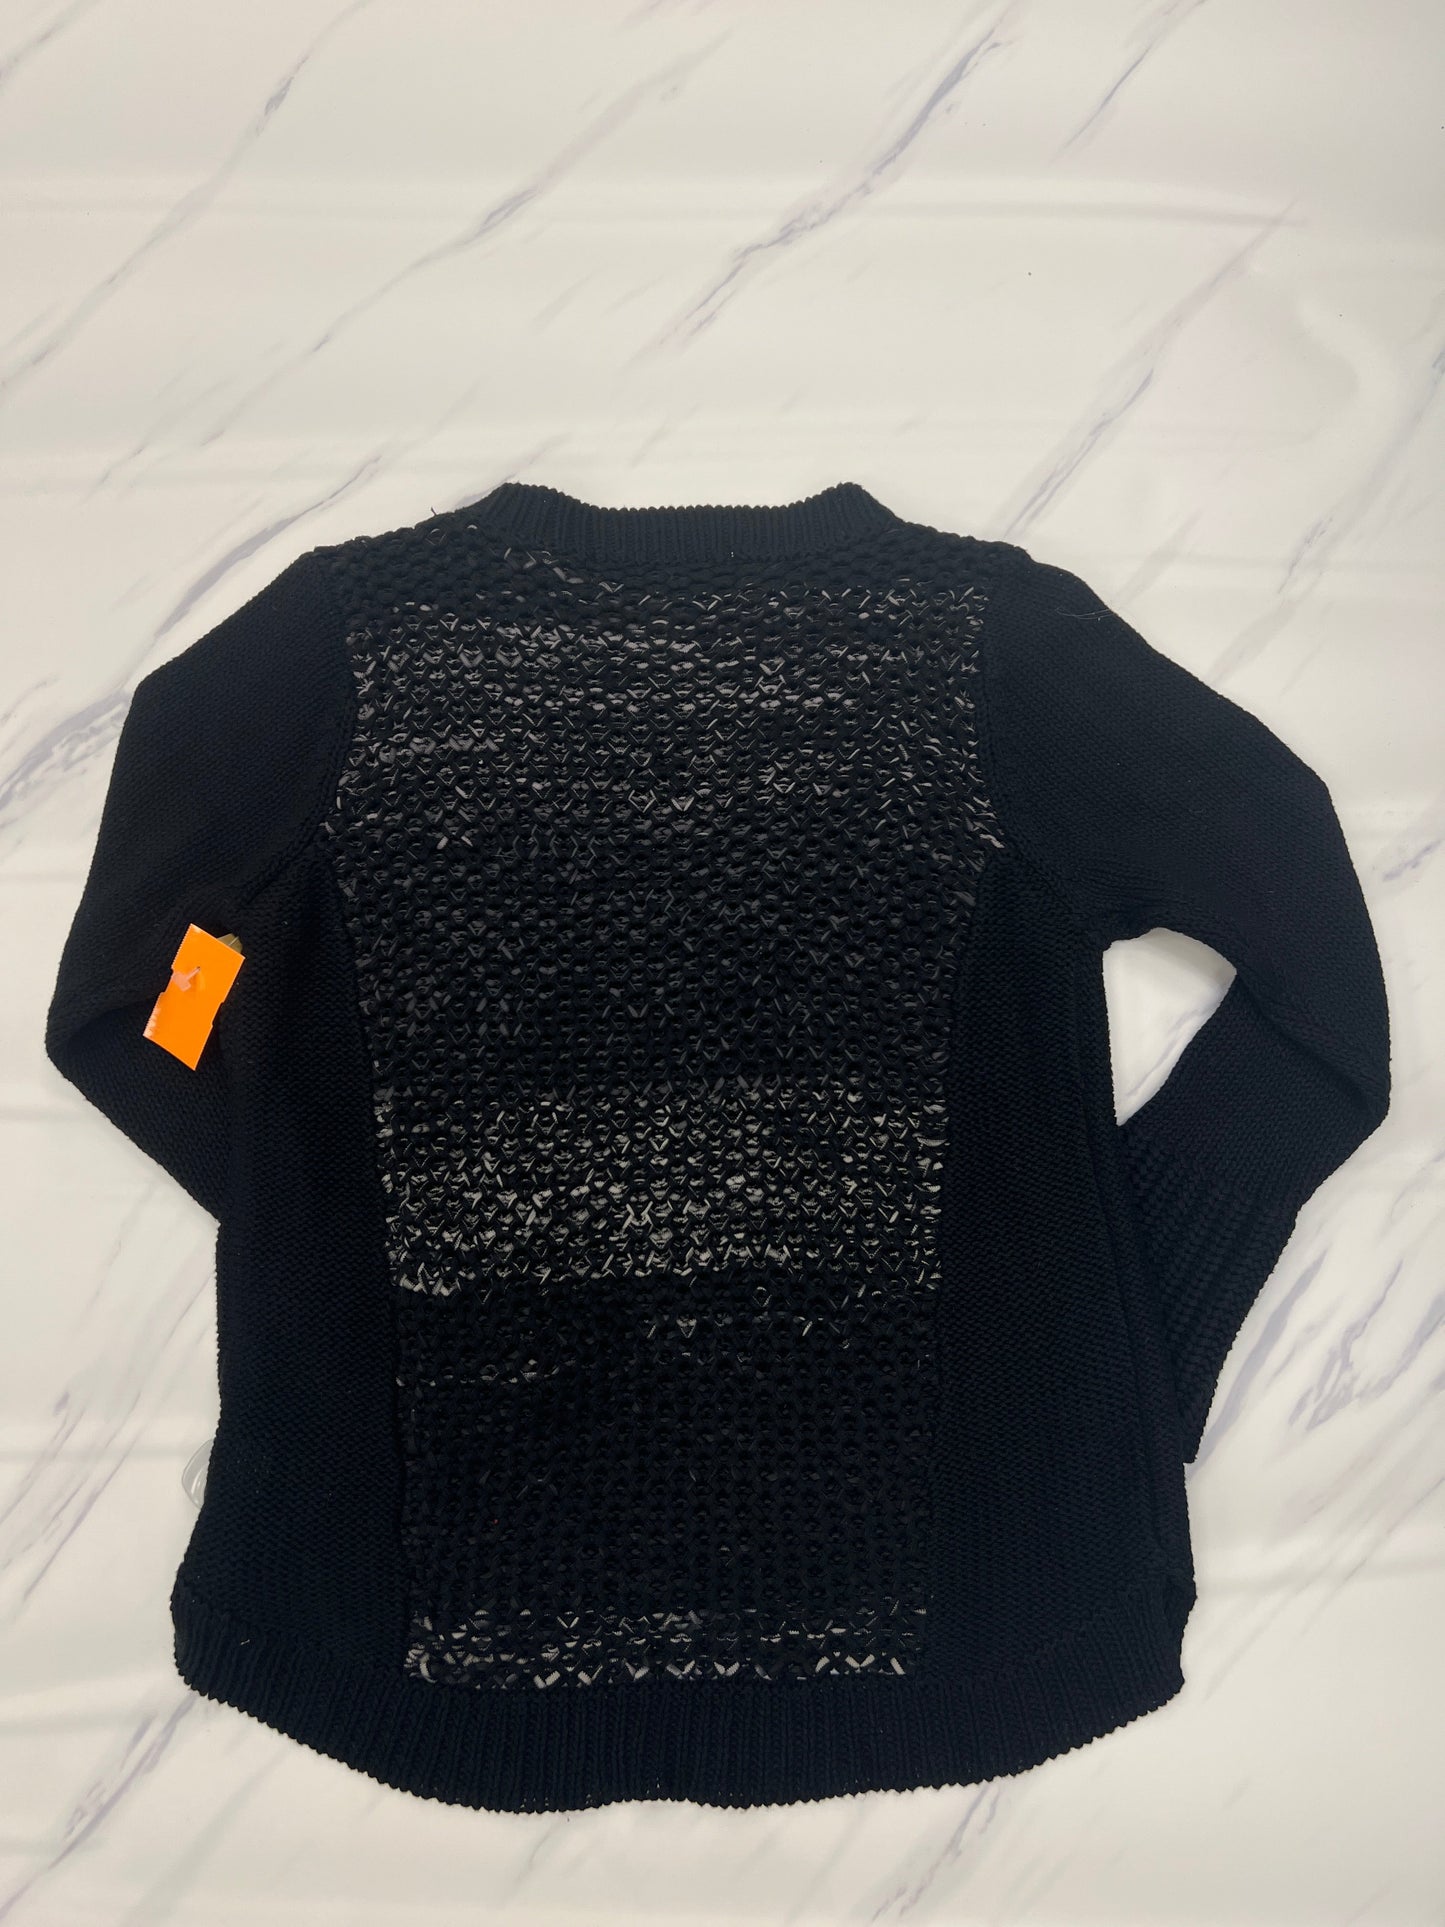 Sweater By Curio  Size: S